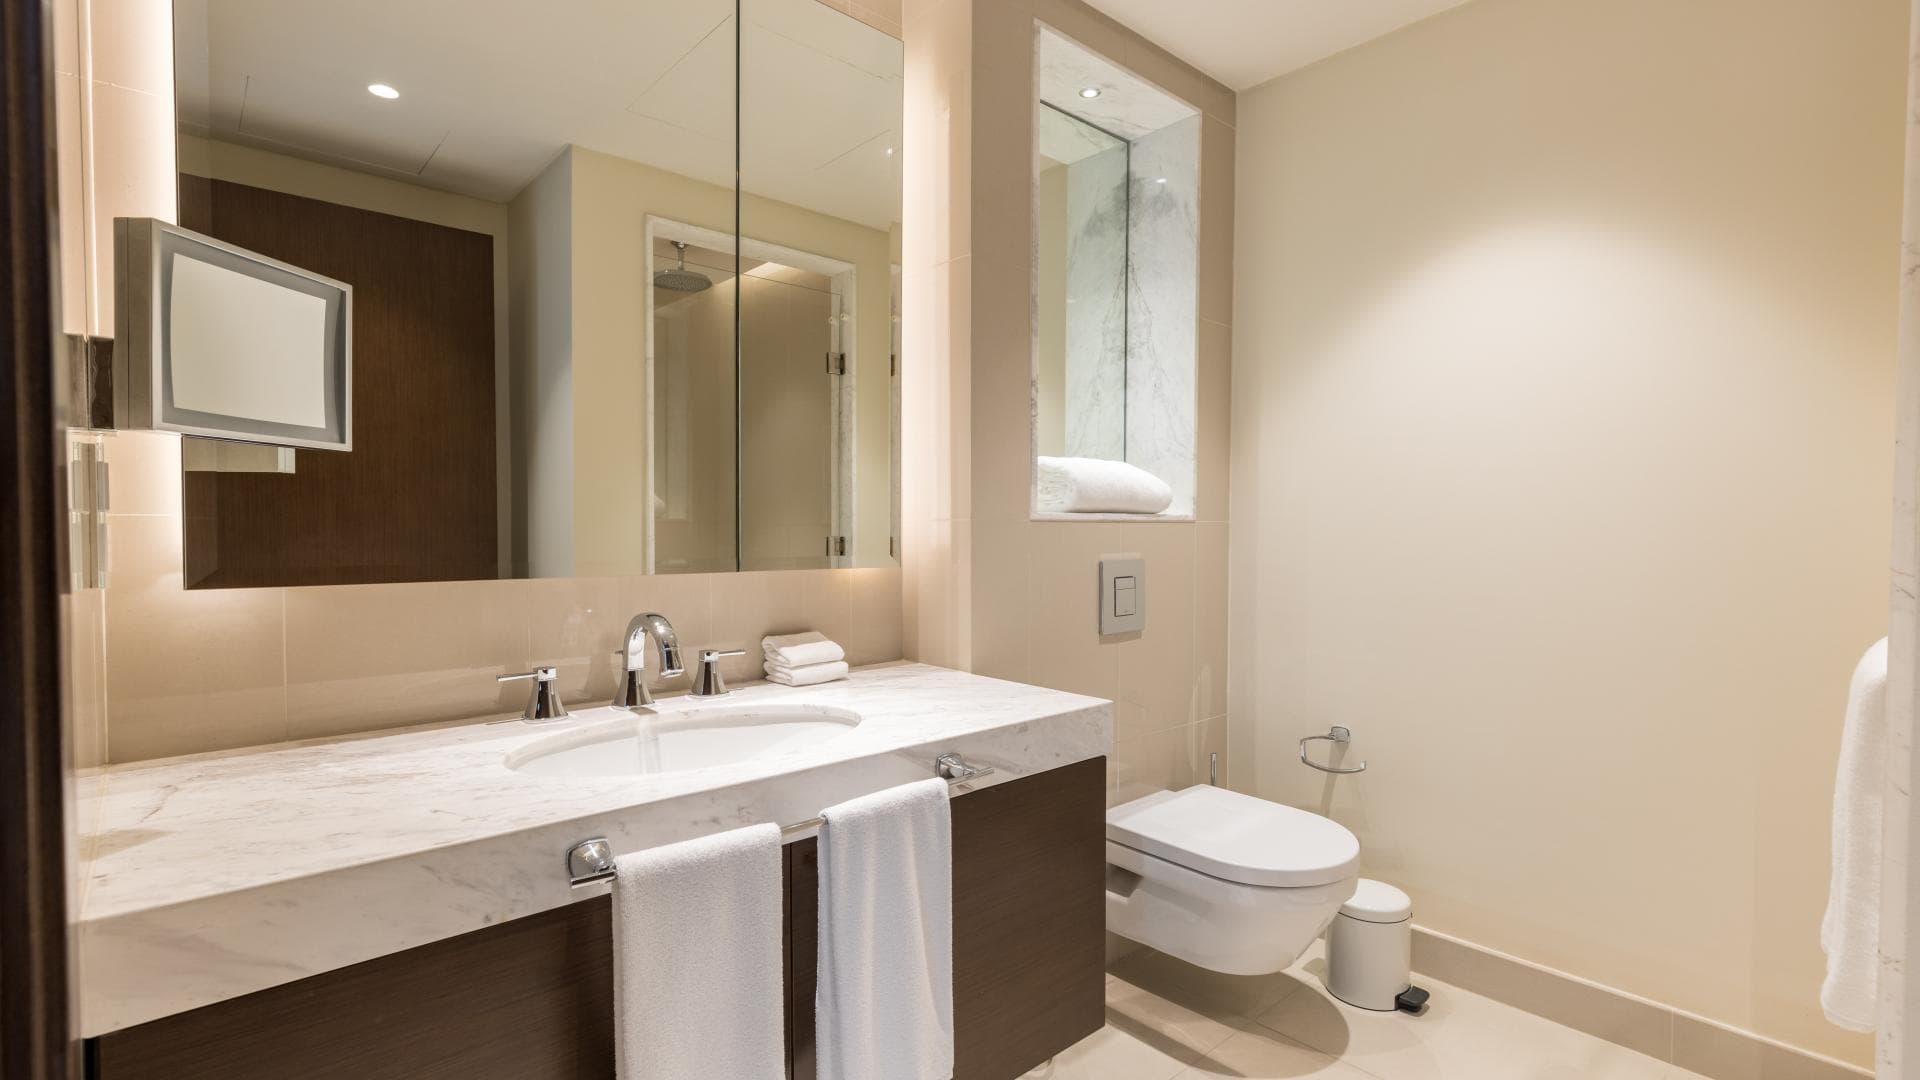 2 Bedroom Apartment For Rent The Address Residence Fountain Views Lp15425 E66cbce0b597380.jpg